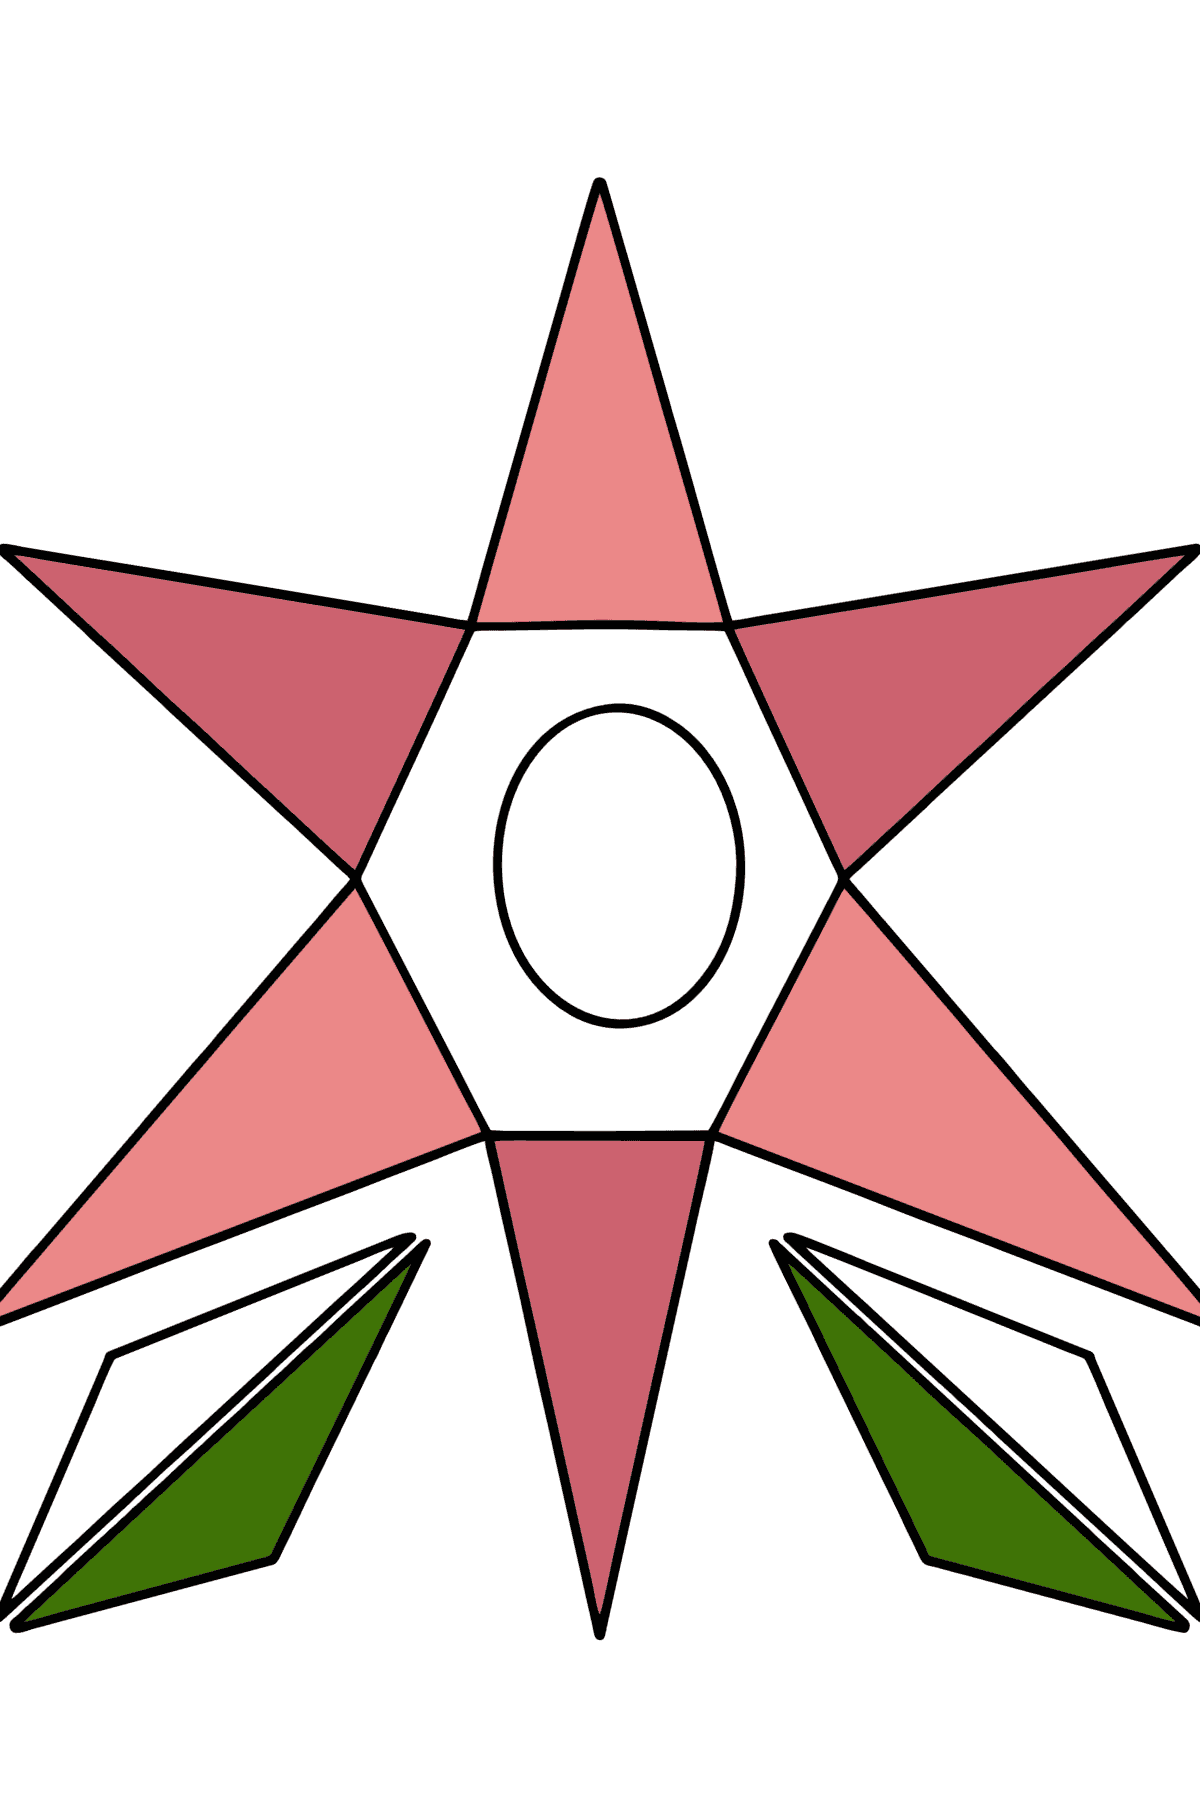 Coloring page - aster from geometric shapes - Coloring Pages for Kids